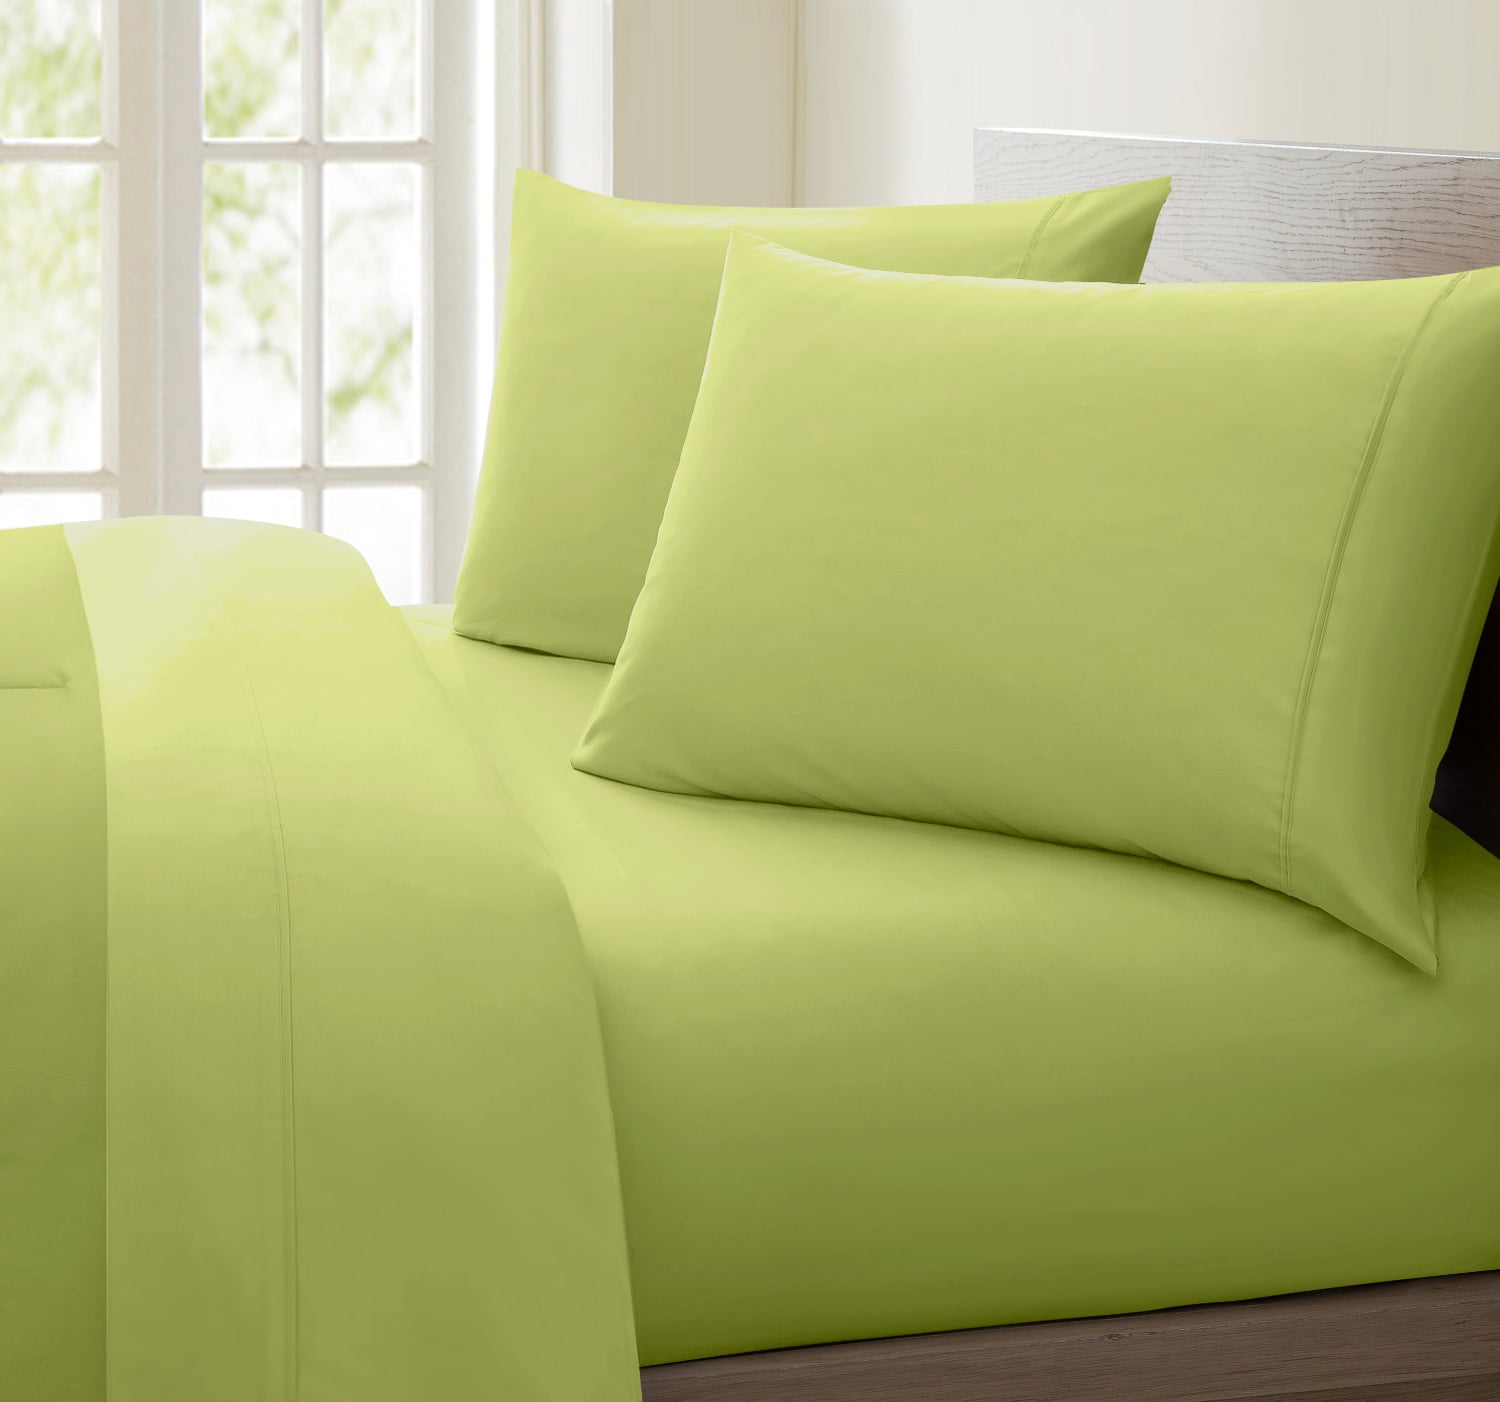 Green Solid King Size 4 Piece Sheet Set 1000 Thread Count 100% Egyptian Cotton 